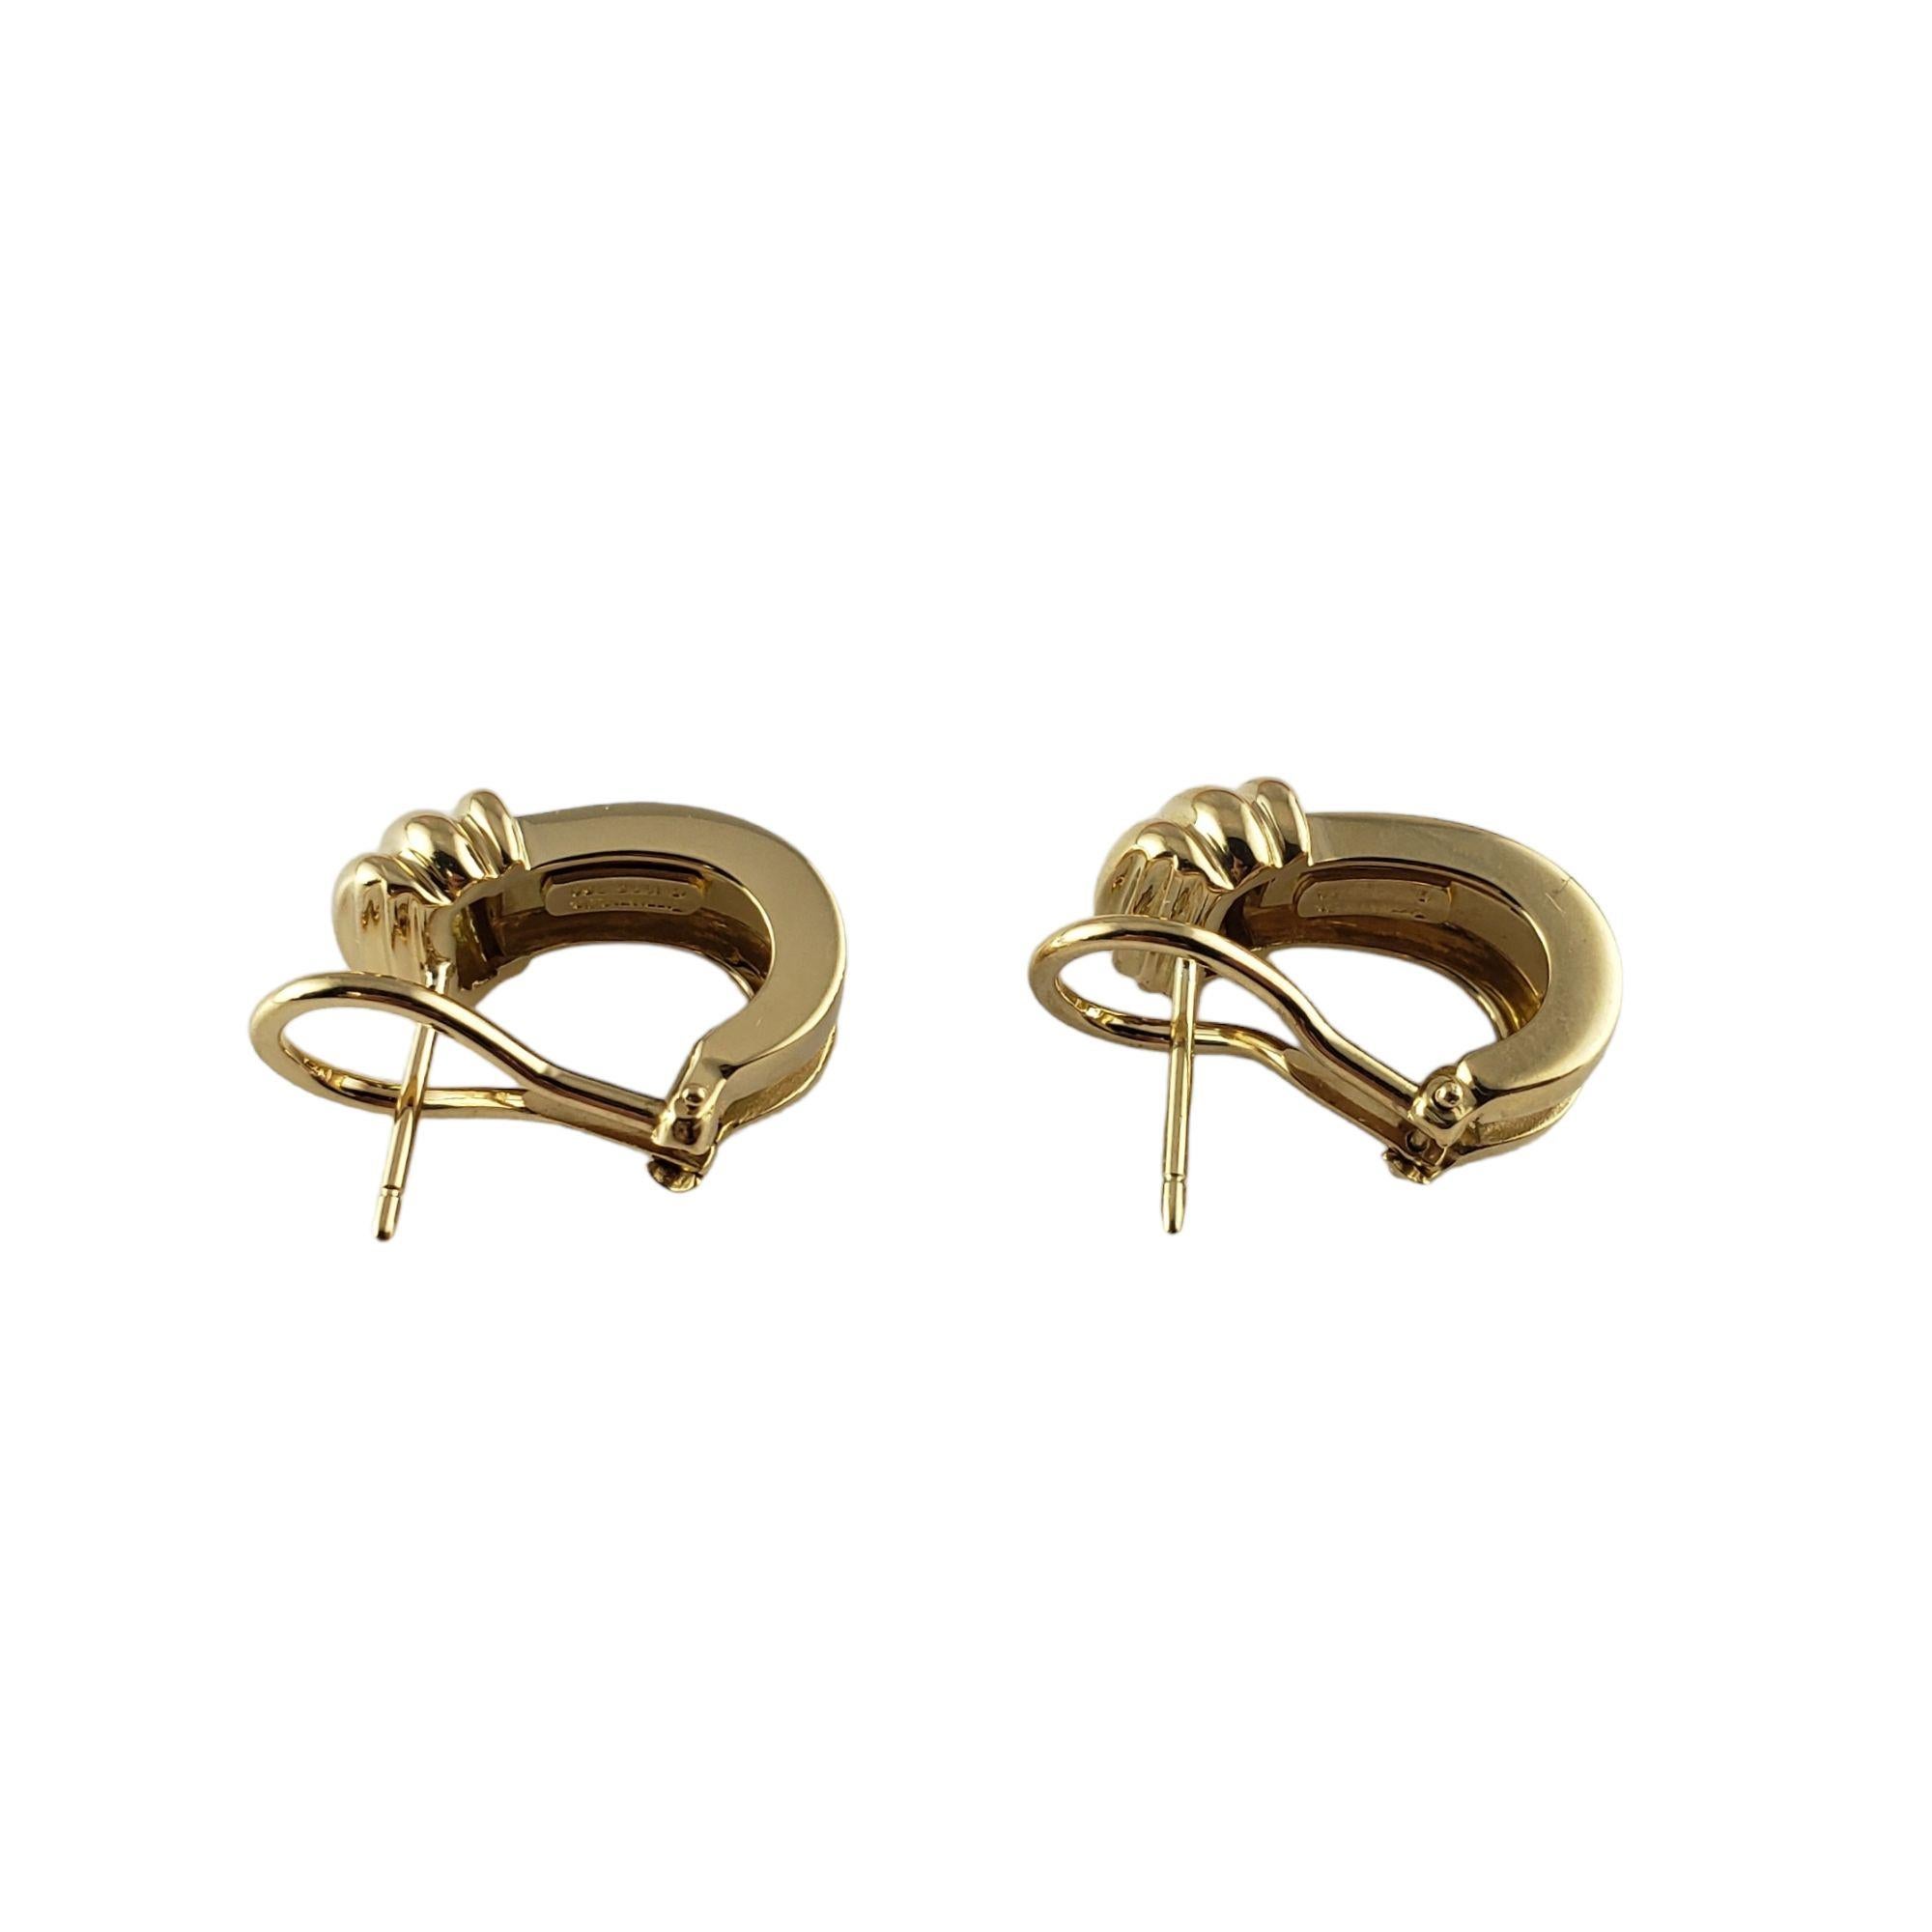 Vintage Tiffany & Co. 18 Karat Yellow Gold Atlas Earrings-

These elegant earrings by Tiffany & Co. are crafted in meticulously detailed 18K yellow gold. Omega back closures.

Size: 19 mm x 7 mm

Weight: 10.4 gr./ 6.7 dwt.

Hallmark: Tiffany & Co.